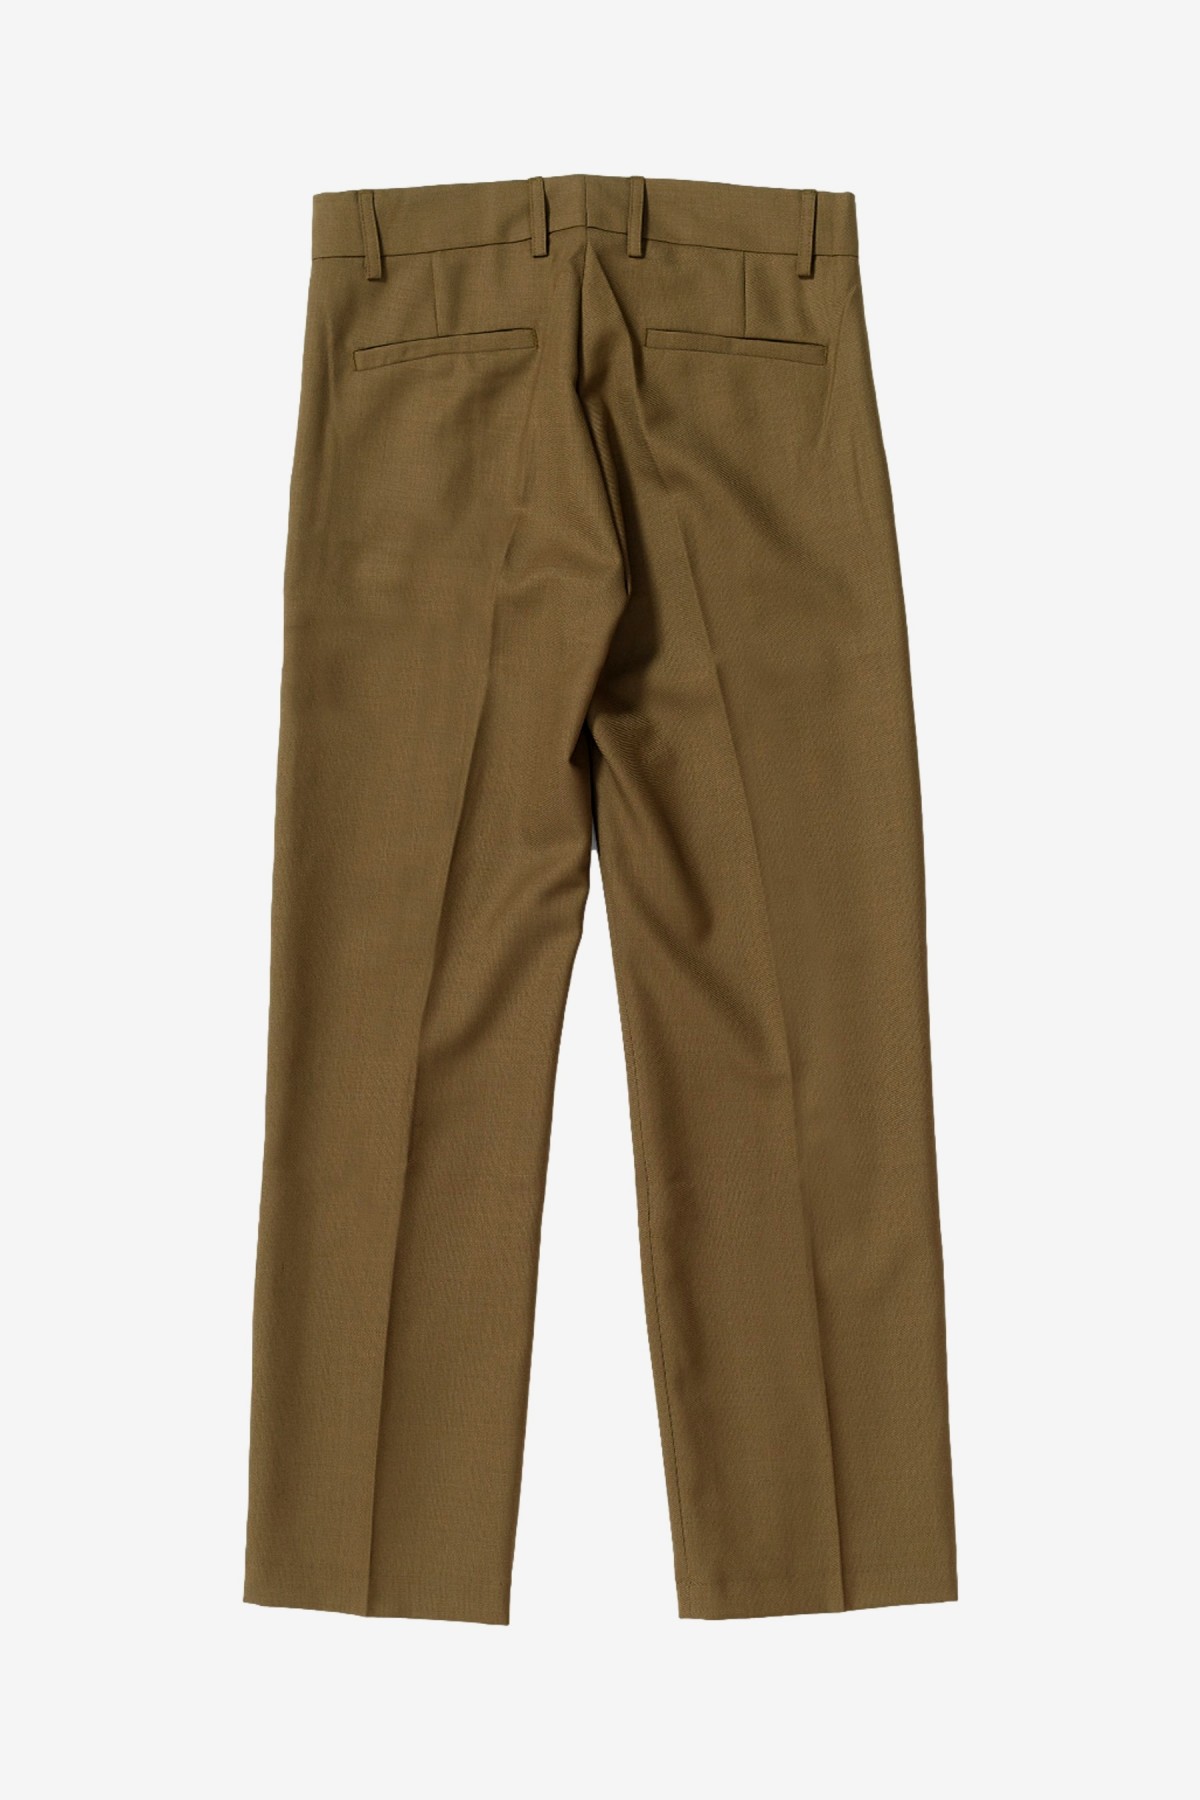 Séfr Mike Suit Trouser in Acadia Green